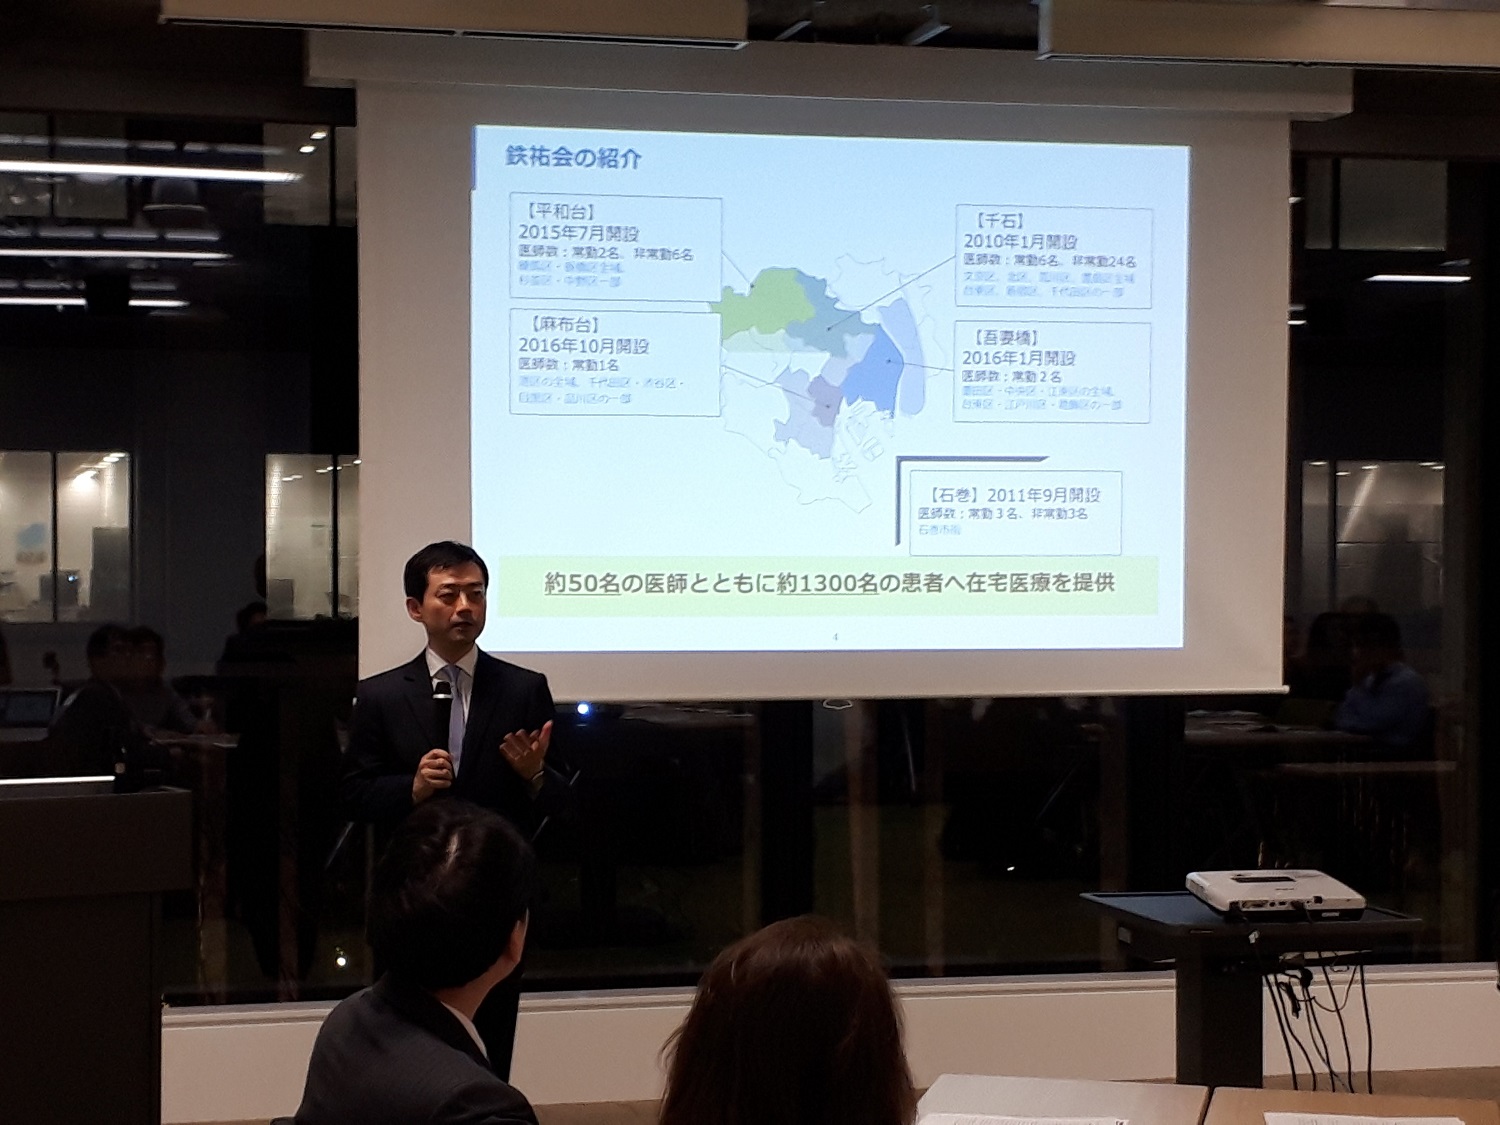 [Event Report] Health Policy Academy, Health Policy 101: Session 5 “Community Medicine” (Lecture by Dr. Shinsuke Muto)